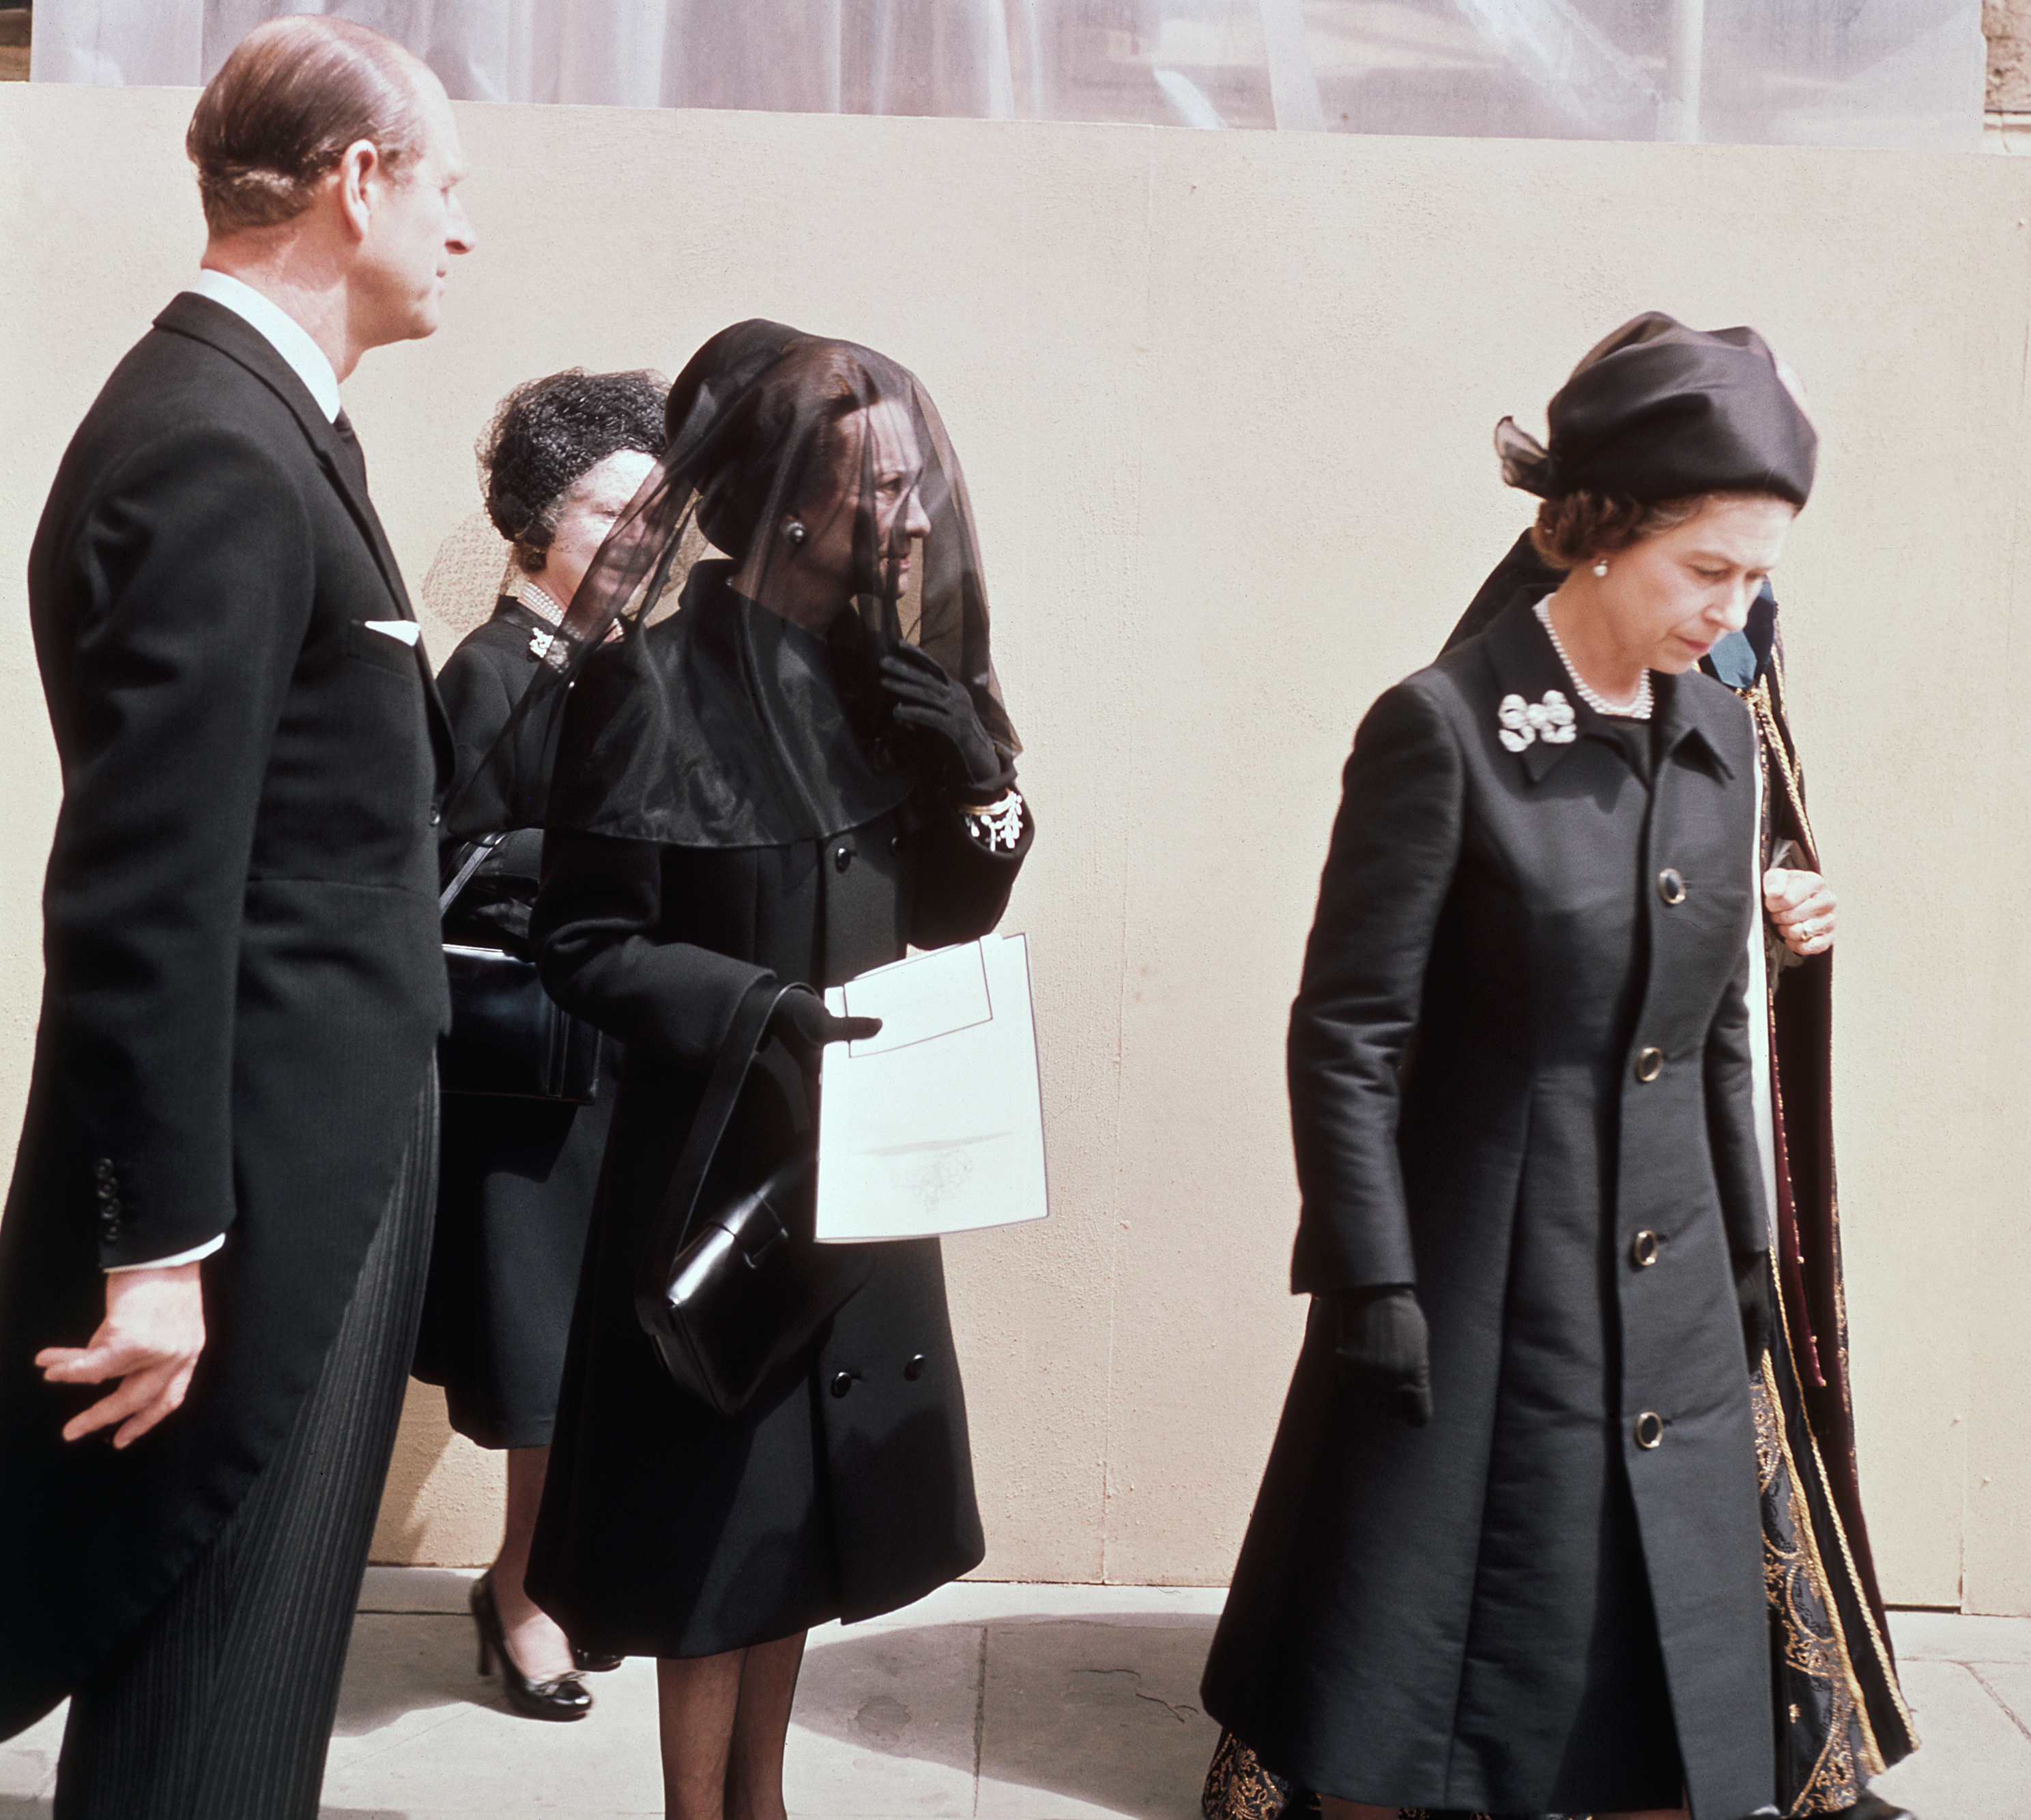 <p>The Duchess of Windsor -- the twice-divorced American for whom King Edward VIII gave up his throne and became the Duke of Windsor -- walked from his funeral service at St. George's Chapel at Windsor Castle with Queen Elizabeth II, Prince Philip and Queen Elizabeth the Queen Mother on June 5, 1977. </p><p>It was the former Wallis Simpson's first and last public appearance with the royal family in England since she and her husband were exiled following his abdication. She flew home to Paris immediately after the burial.</p>